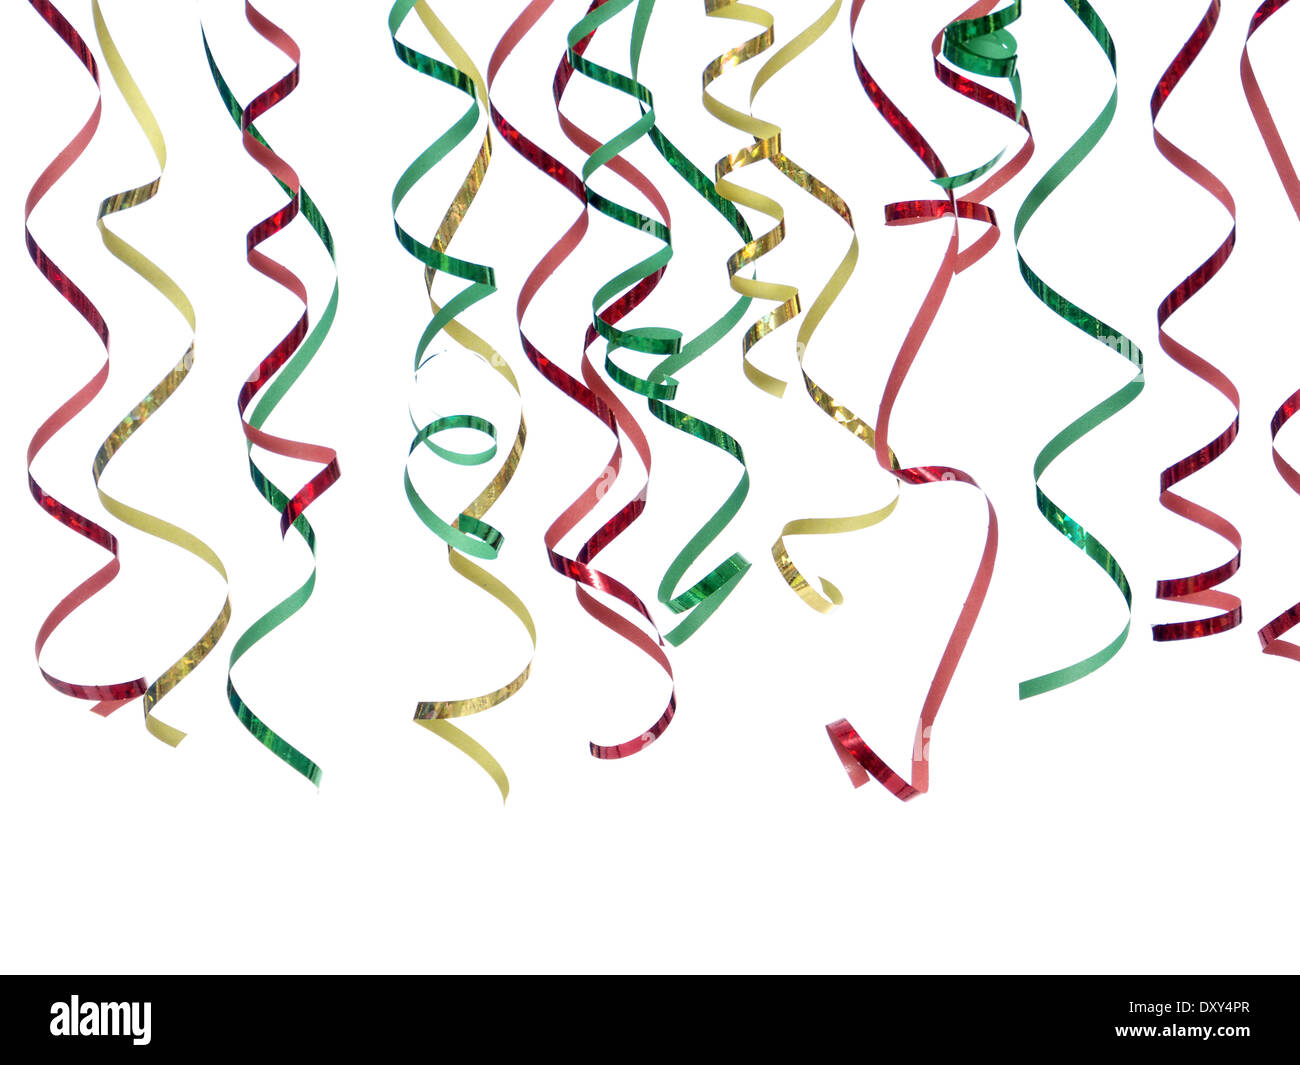 Colorful twisted party streamers in red, green and golden color Stock Photo